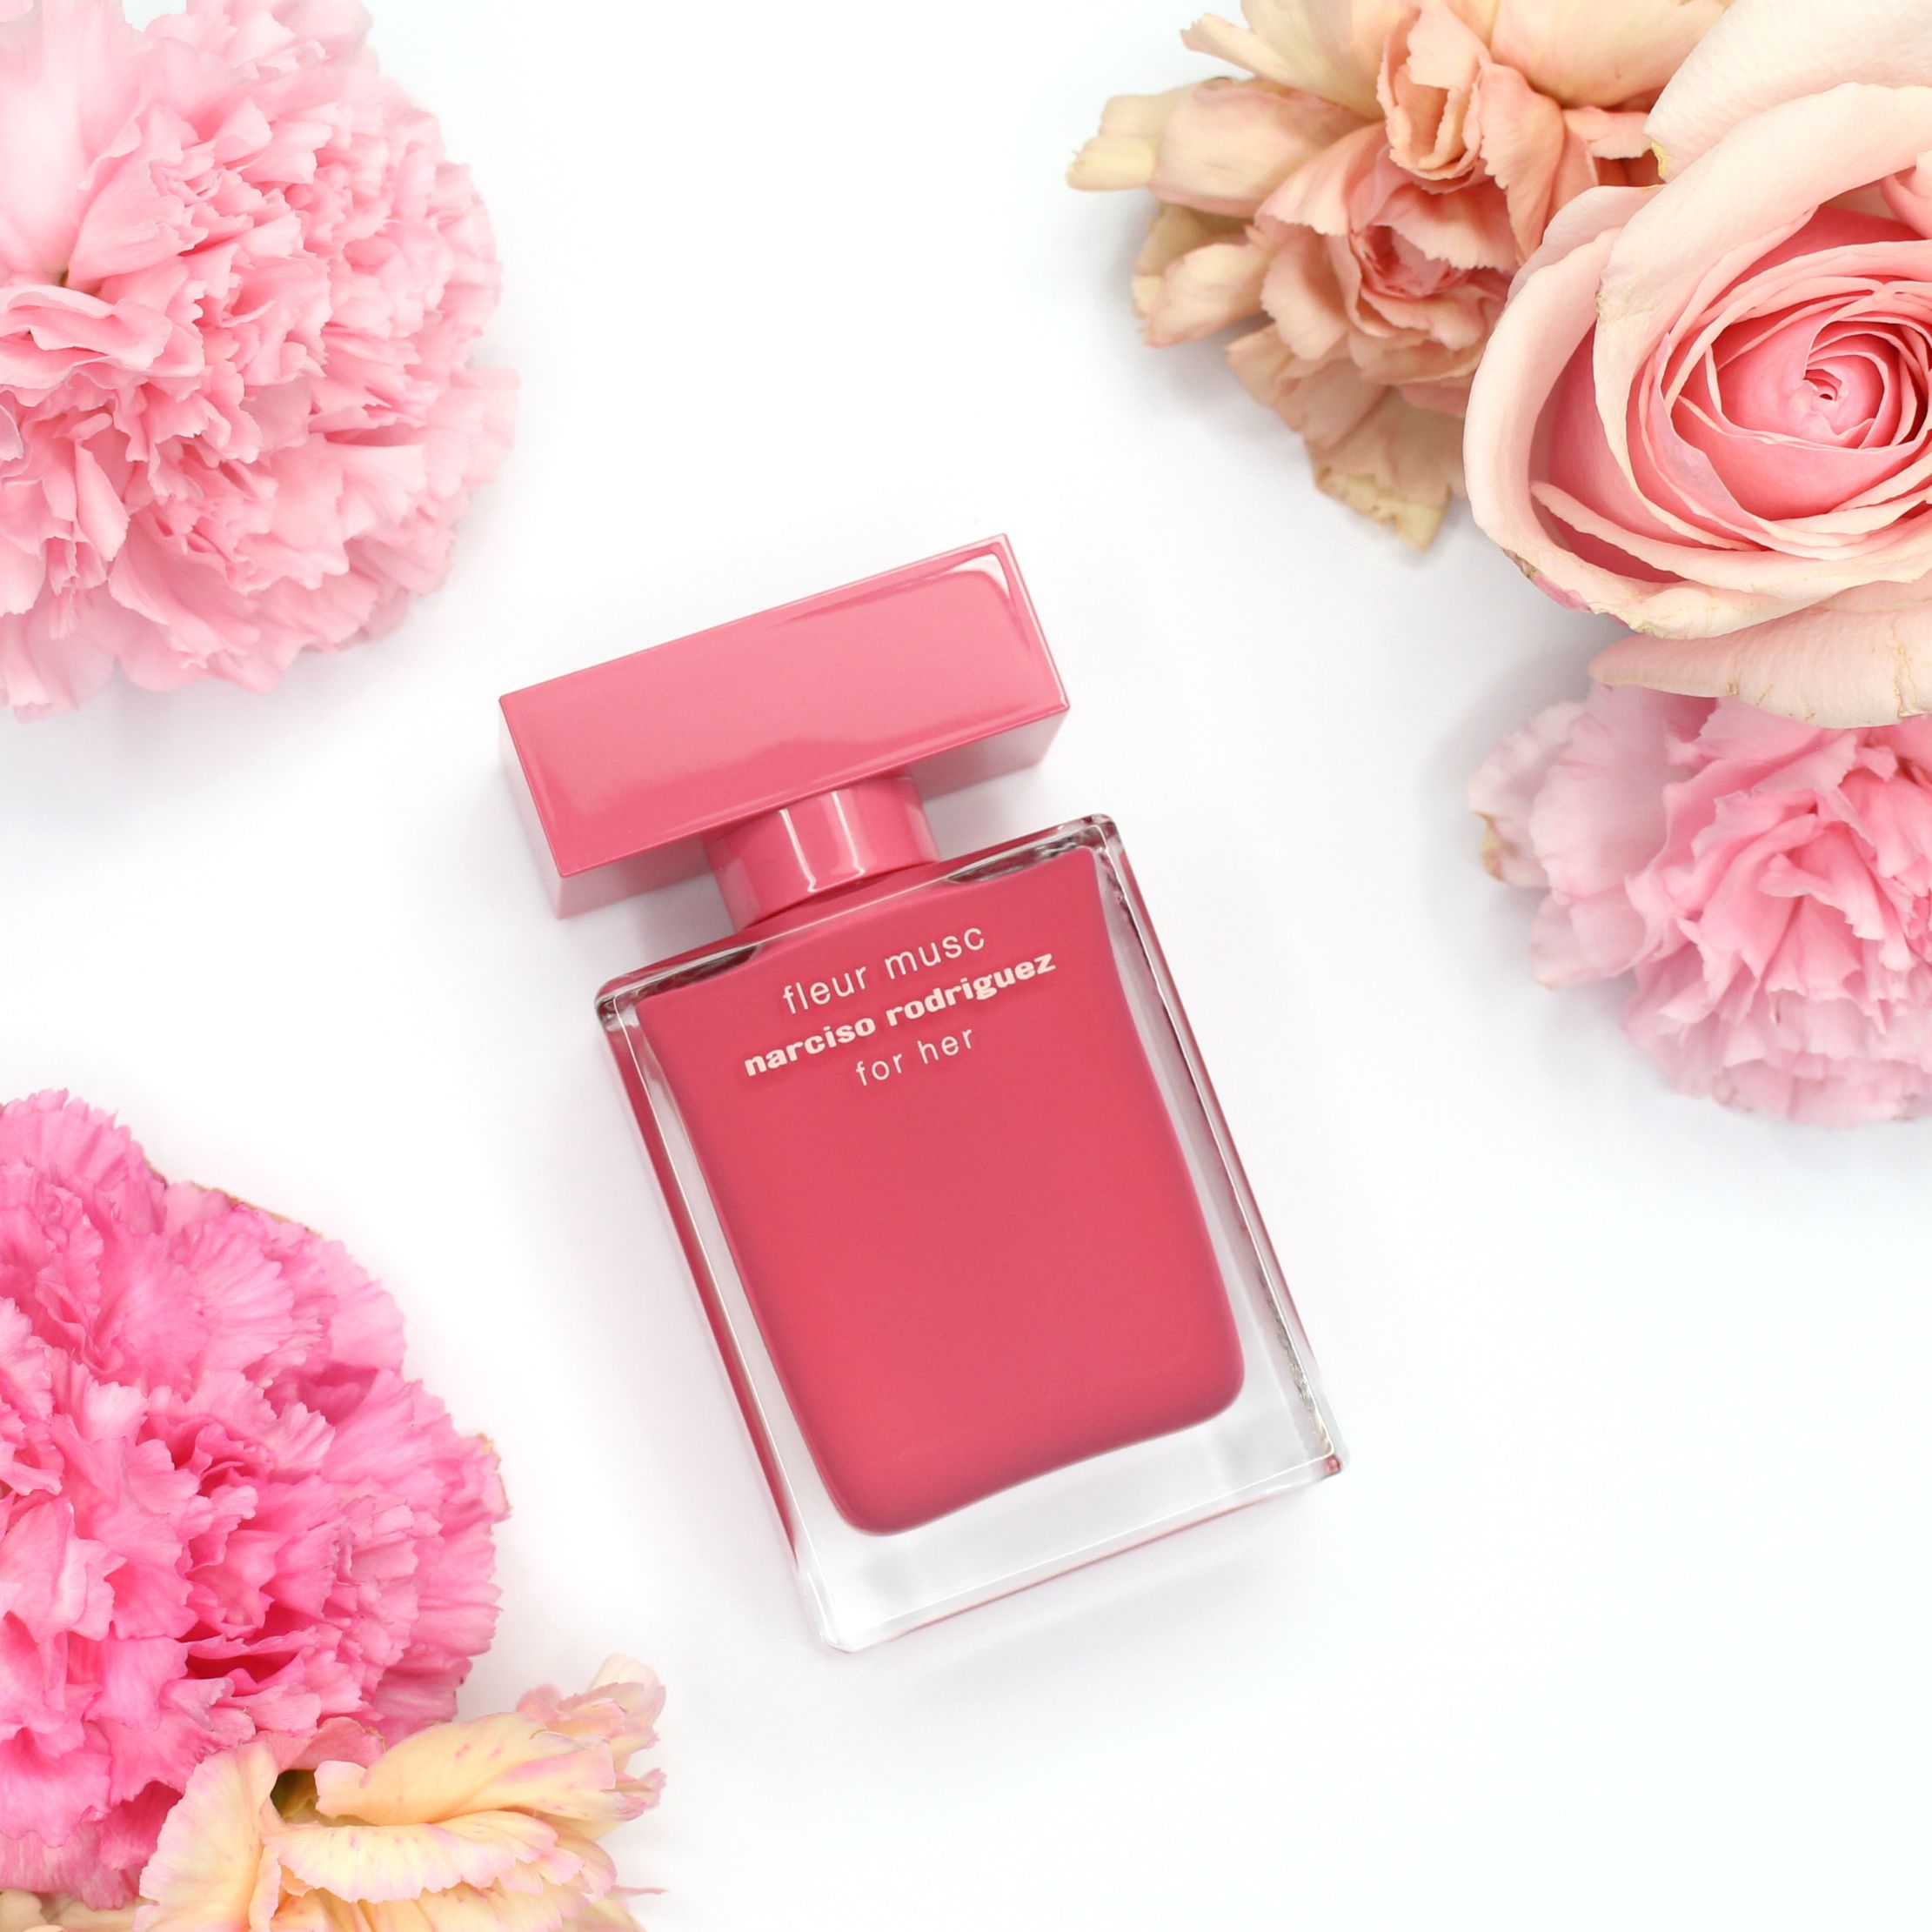 Narciso Rodriguez, Narciso Rodriguez Fleur Musc For Her, Narciso Rodriguez Fleur Musc For Her รีวิว, Narciso Rodriguez Fleur Musc For Her ราคา, Narciso Rodriguez Fleur Musc For Her review, Narciso Rodriguez Fleur Musc For Her EDP, Narciso Rodriguez Fleur Musc For Her EDP รีวิว